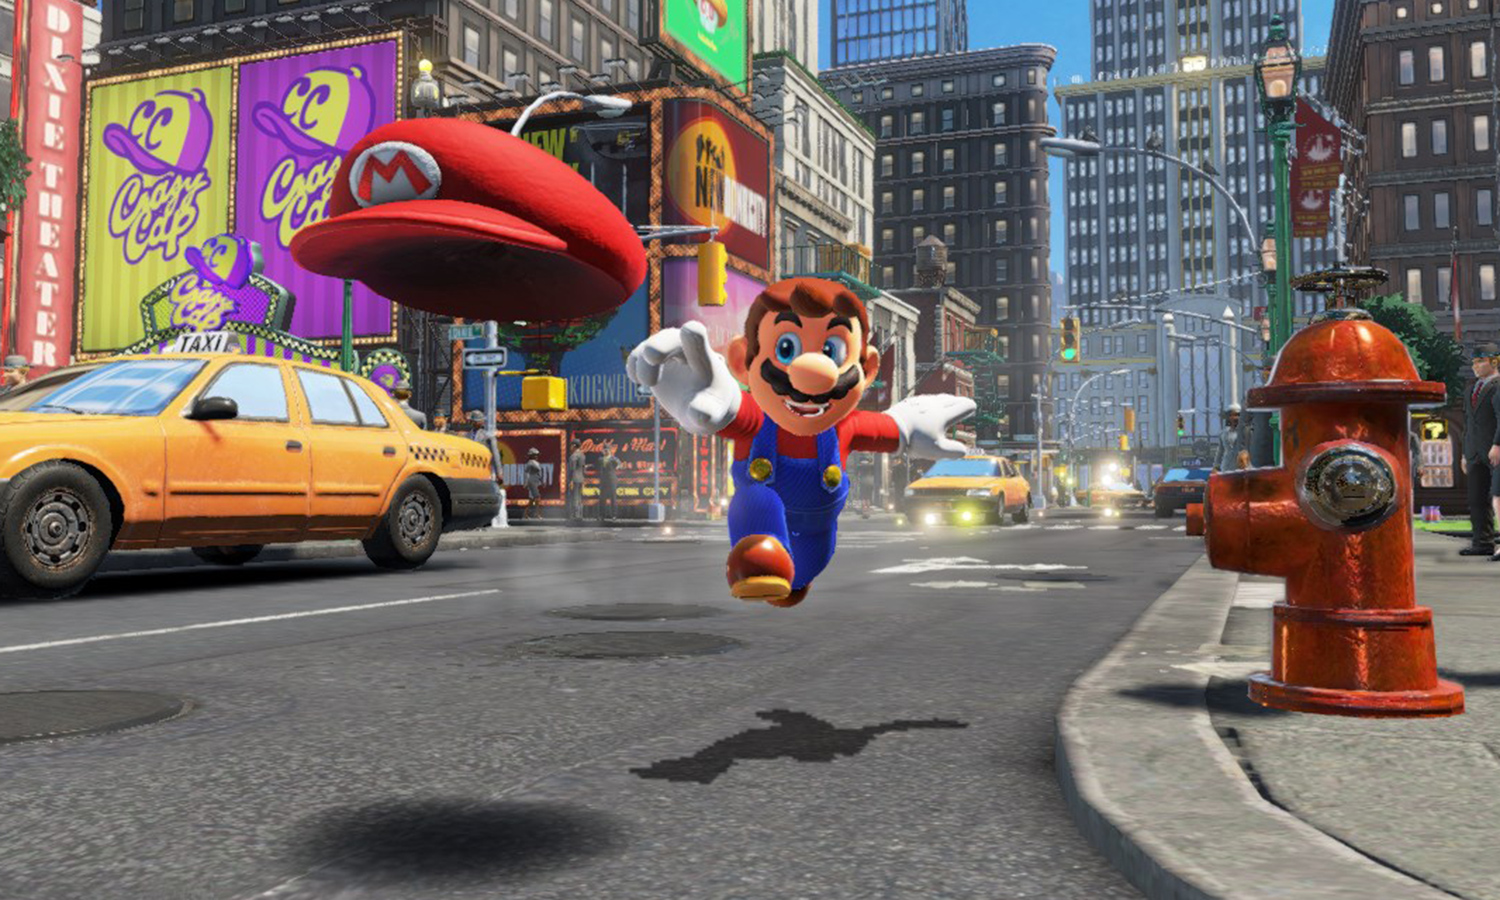 The Best Mario Games You Can Play On Nintendo Switch